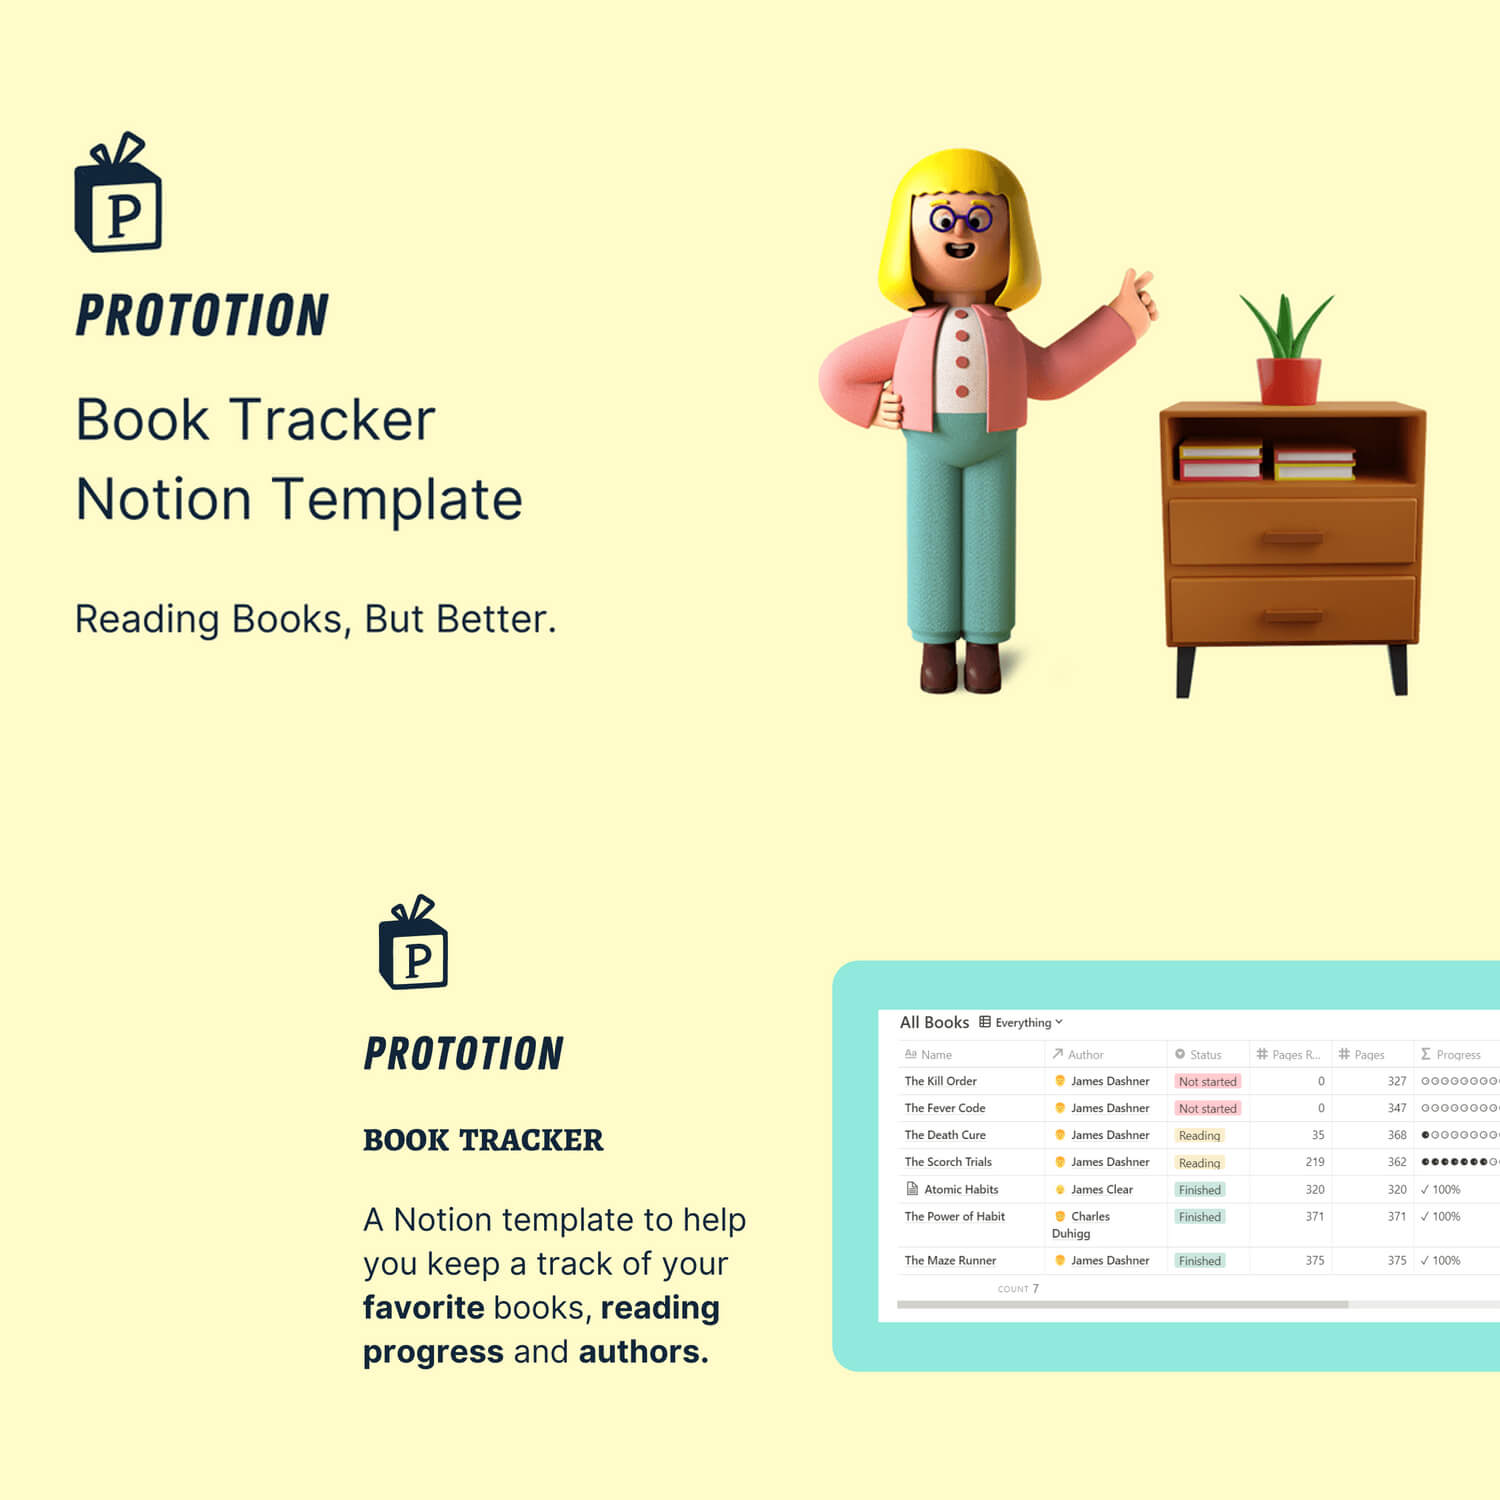 A notion template to help uou keep a track of your favorite books, reading progress and authors.